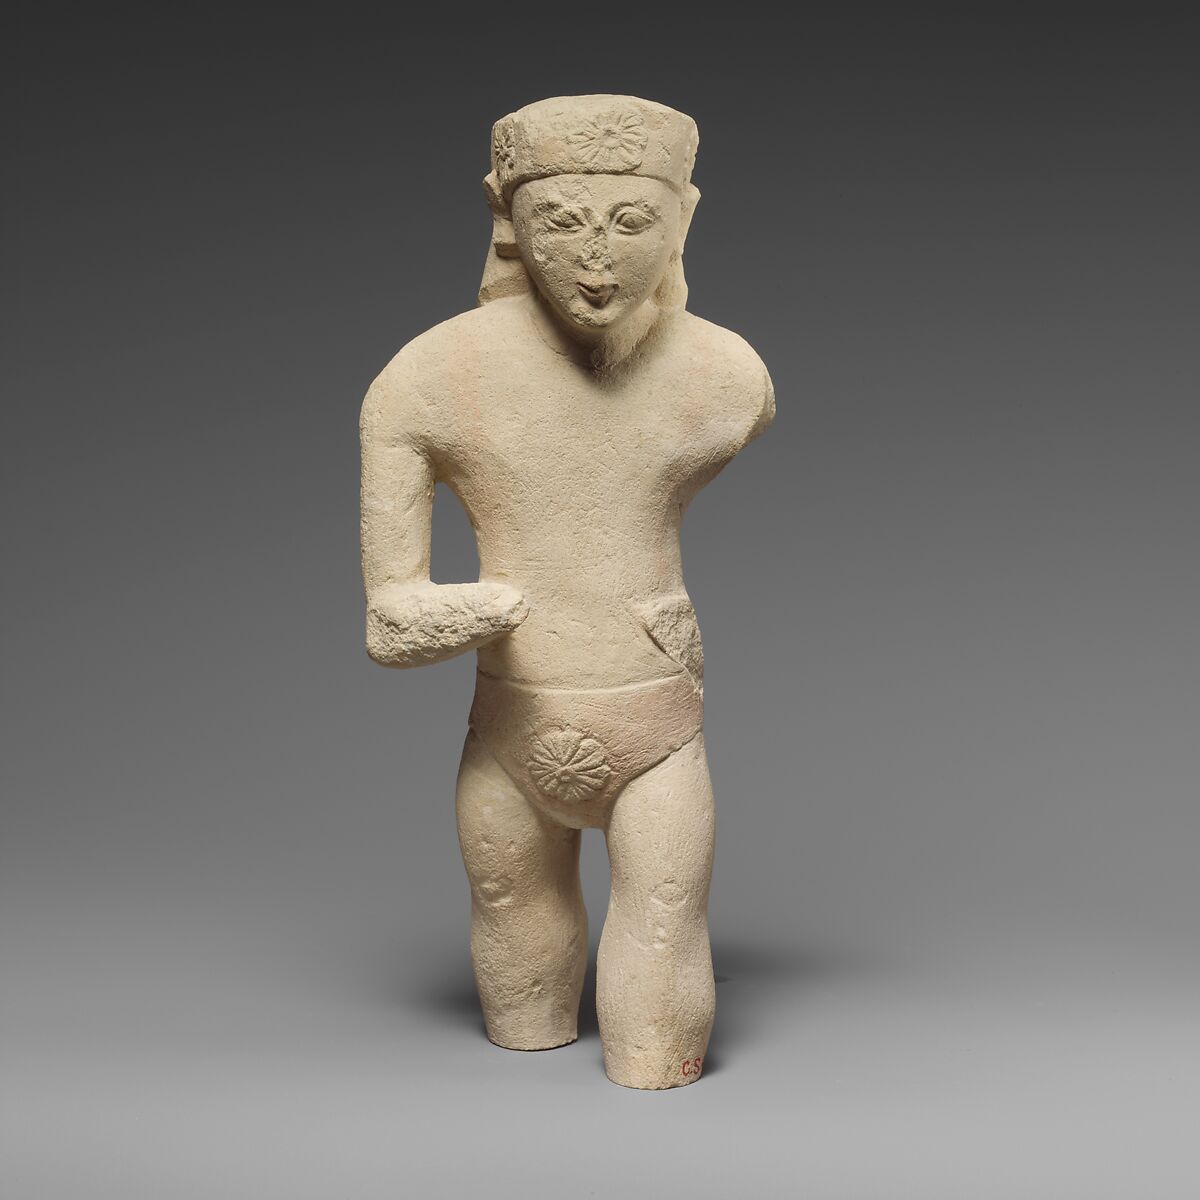 Limestone statuette of a male votary with Cypriot shorts and a diadem, Limestone, Cypriot 